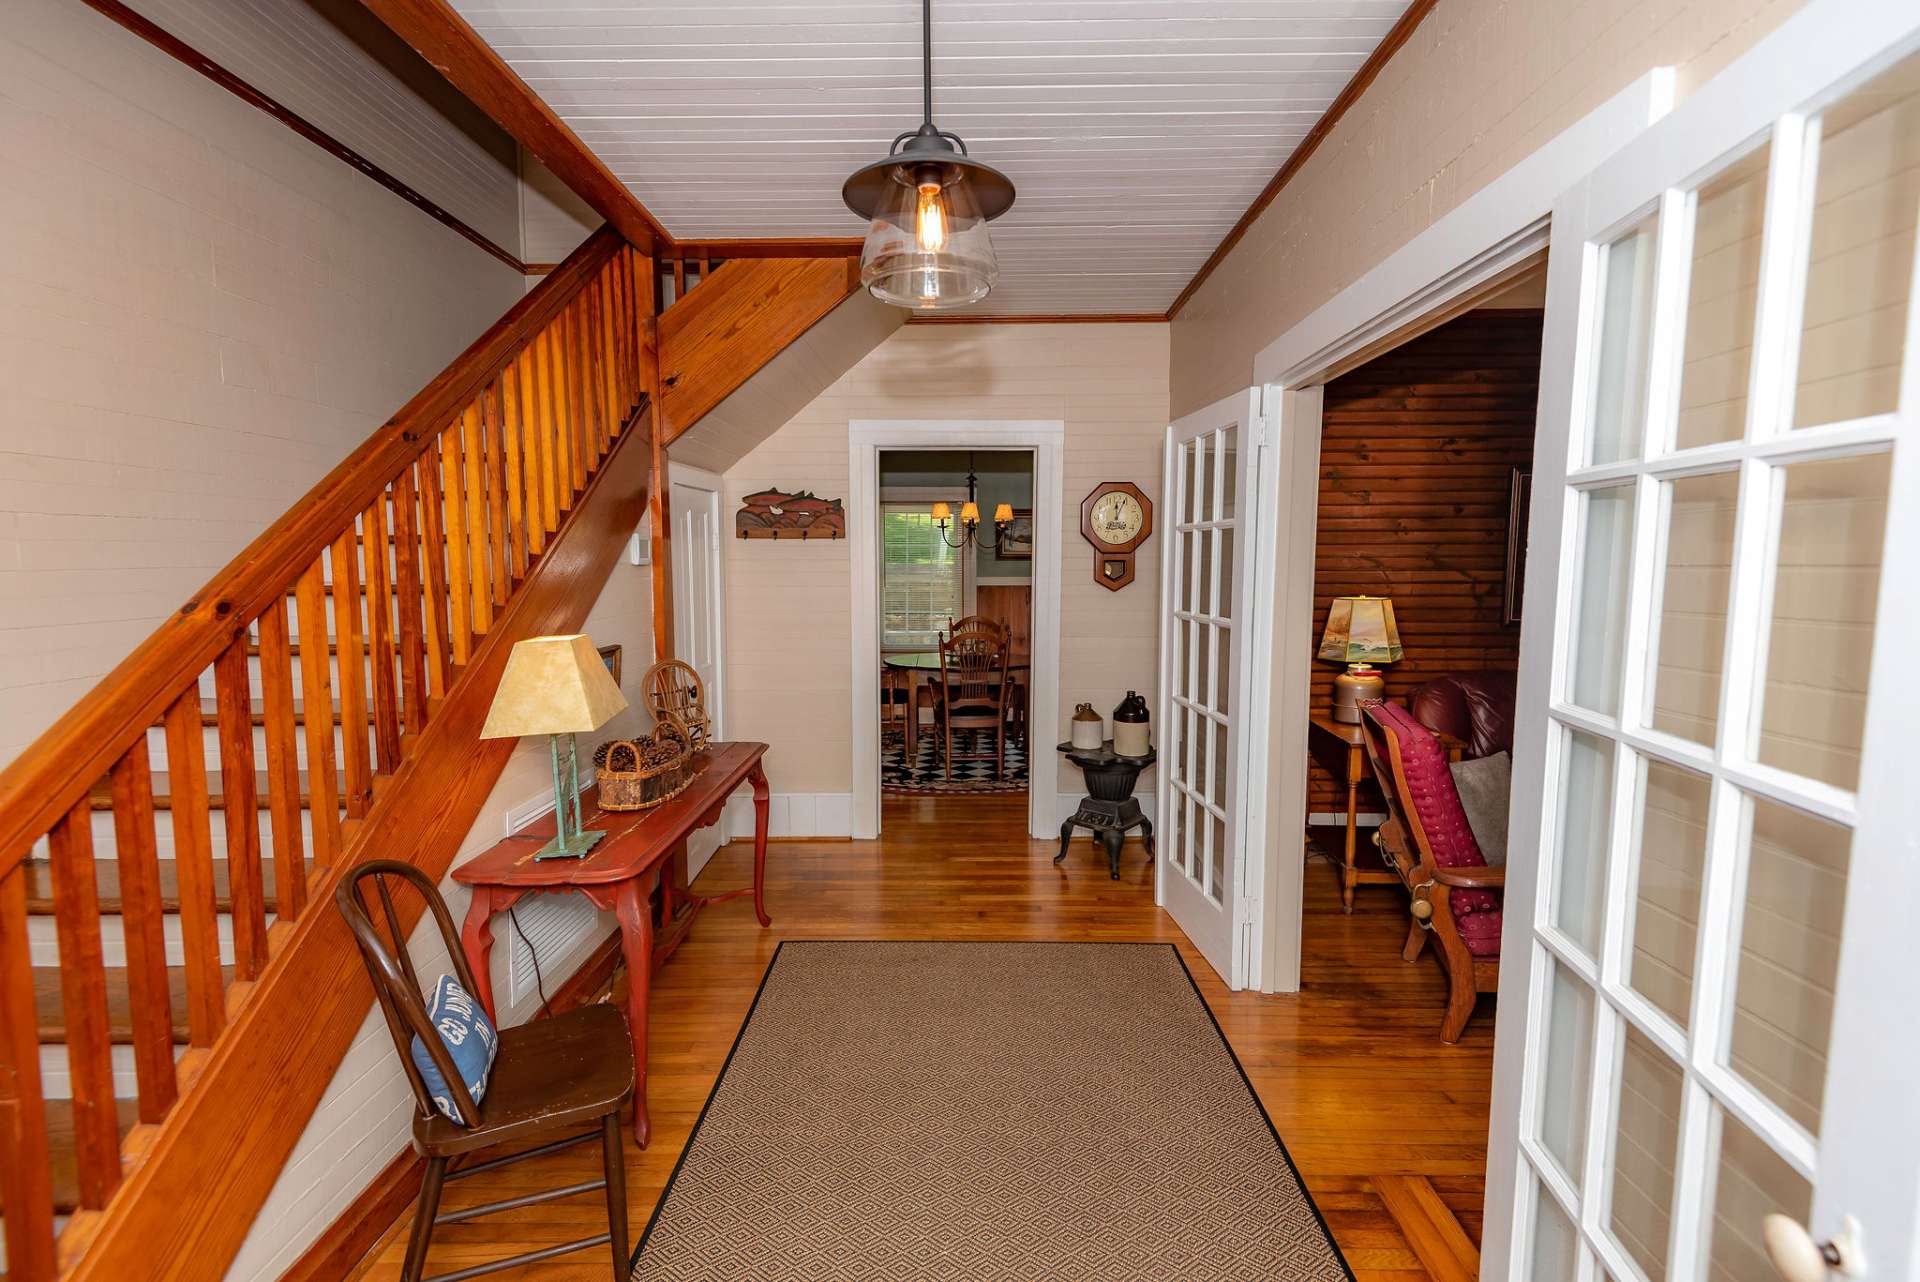 The main level provides a welcoming foyer introducing you to the many charming characteristics of farmhouse living.